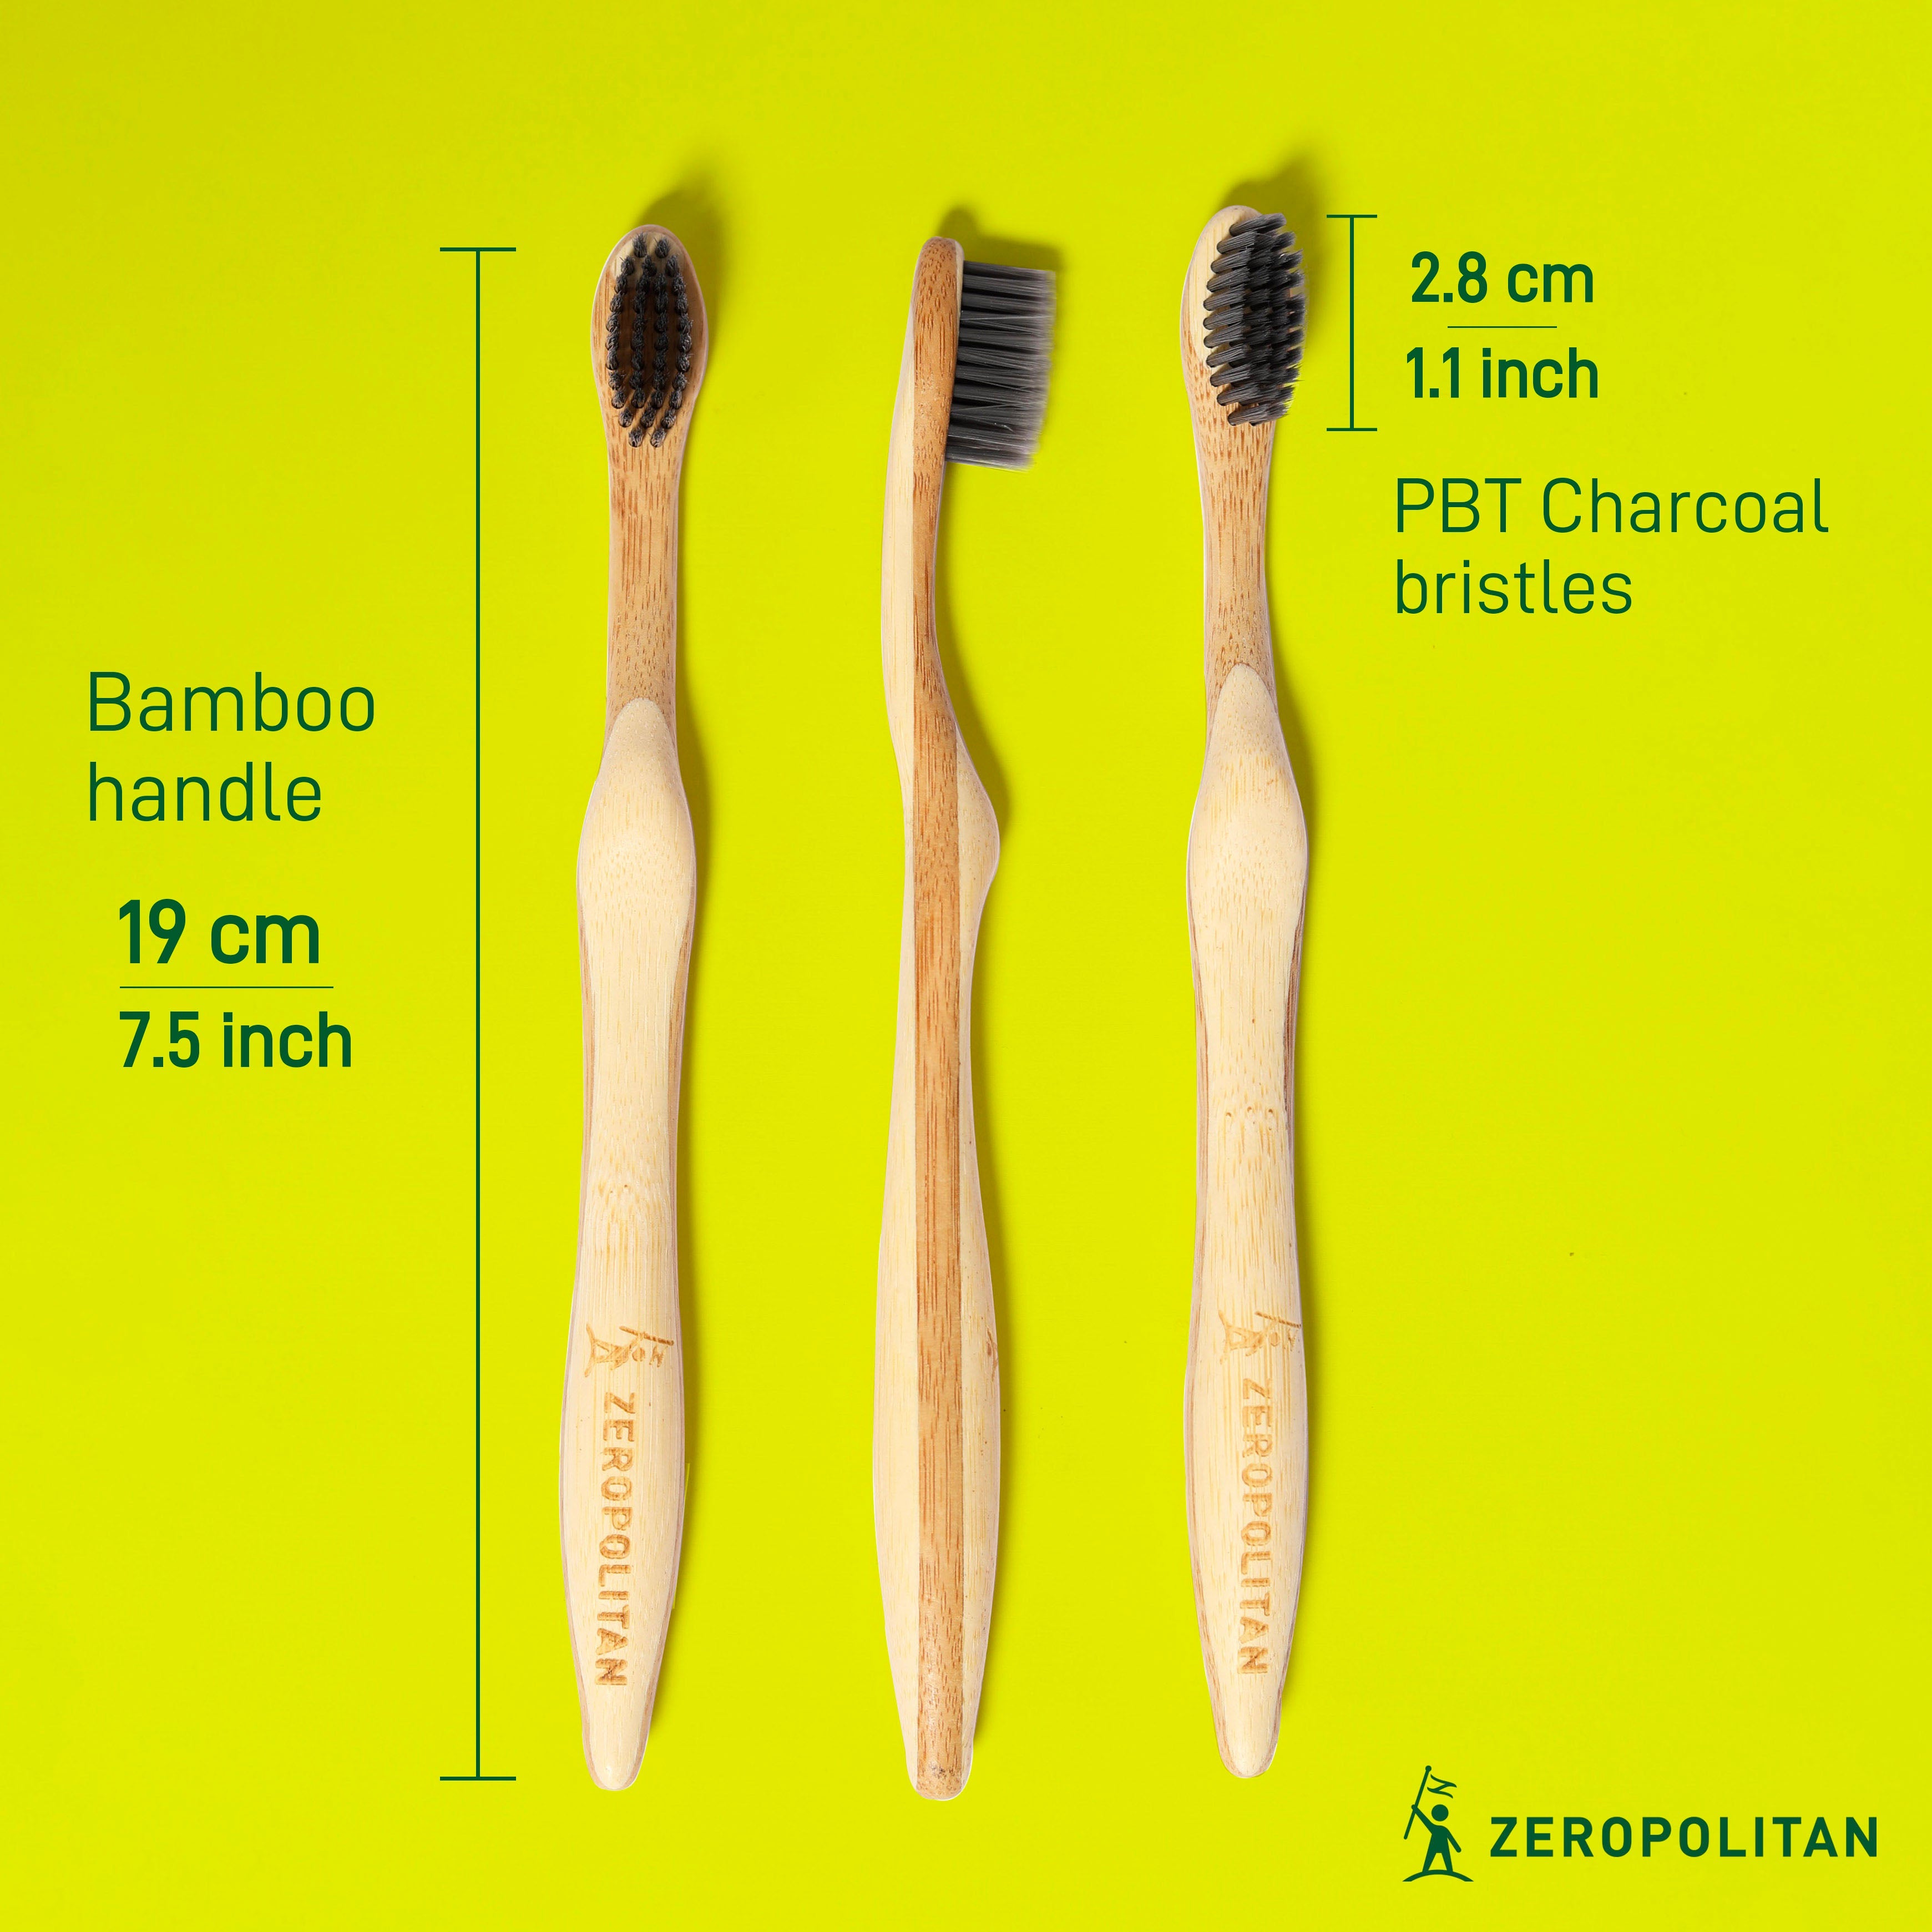 Bamboo Toothbrush with Charcoal Bristles - 4 Pack